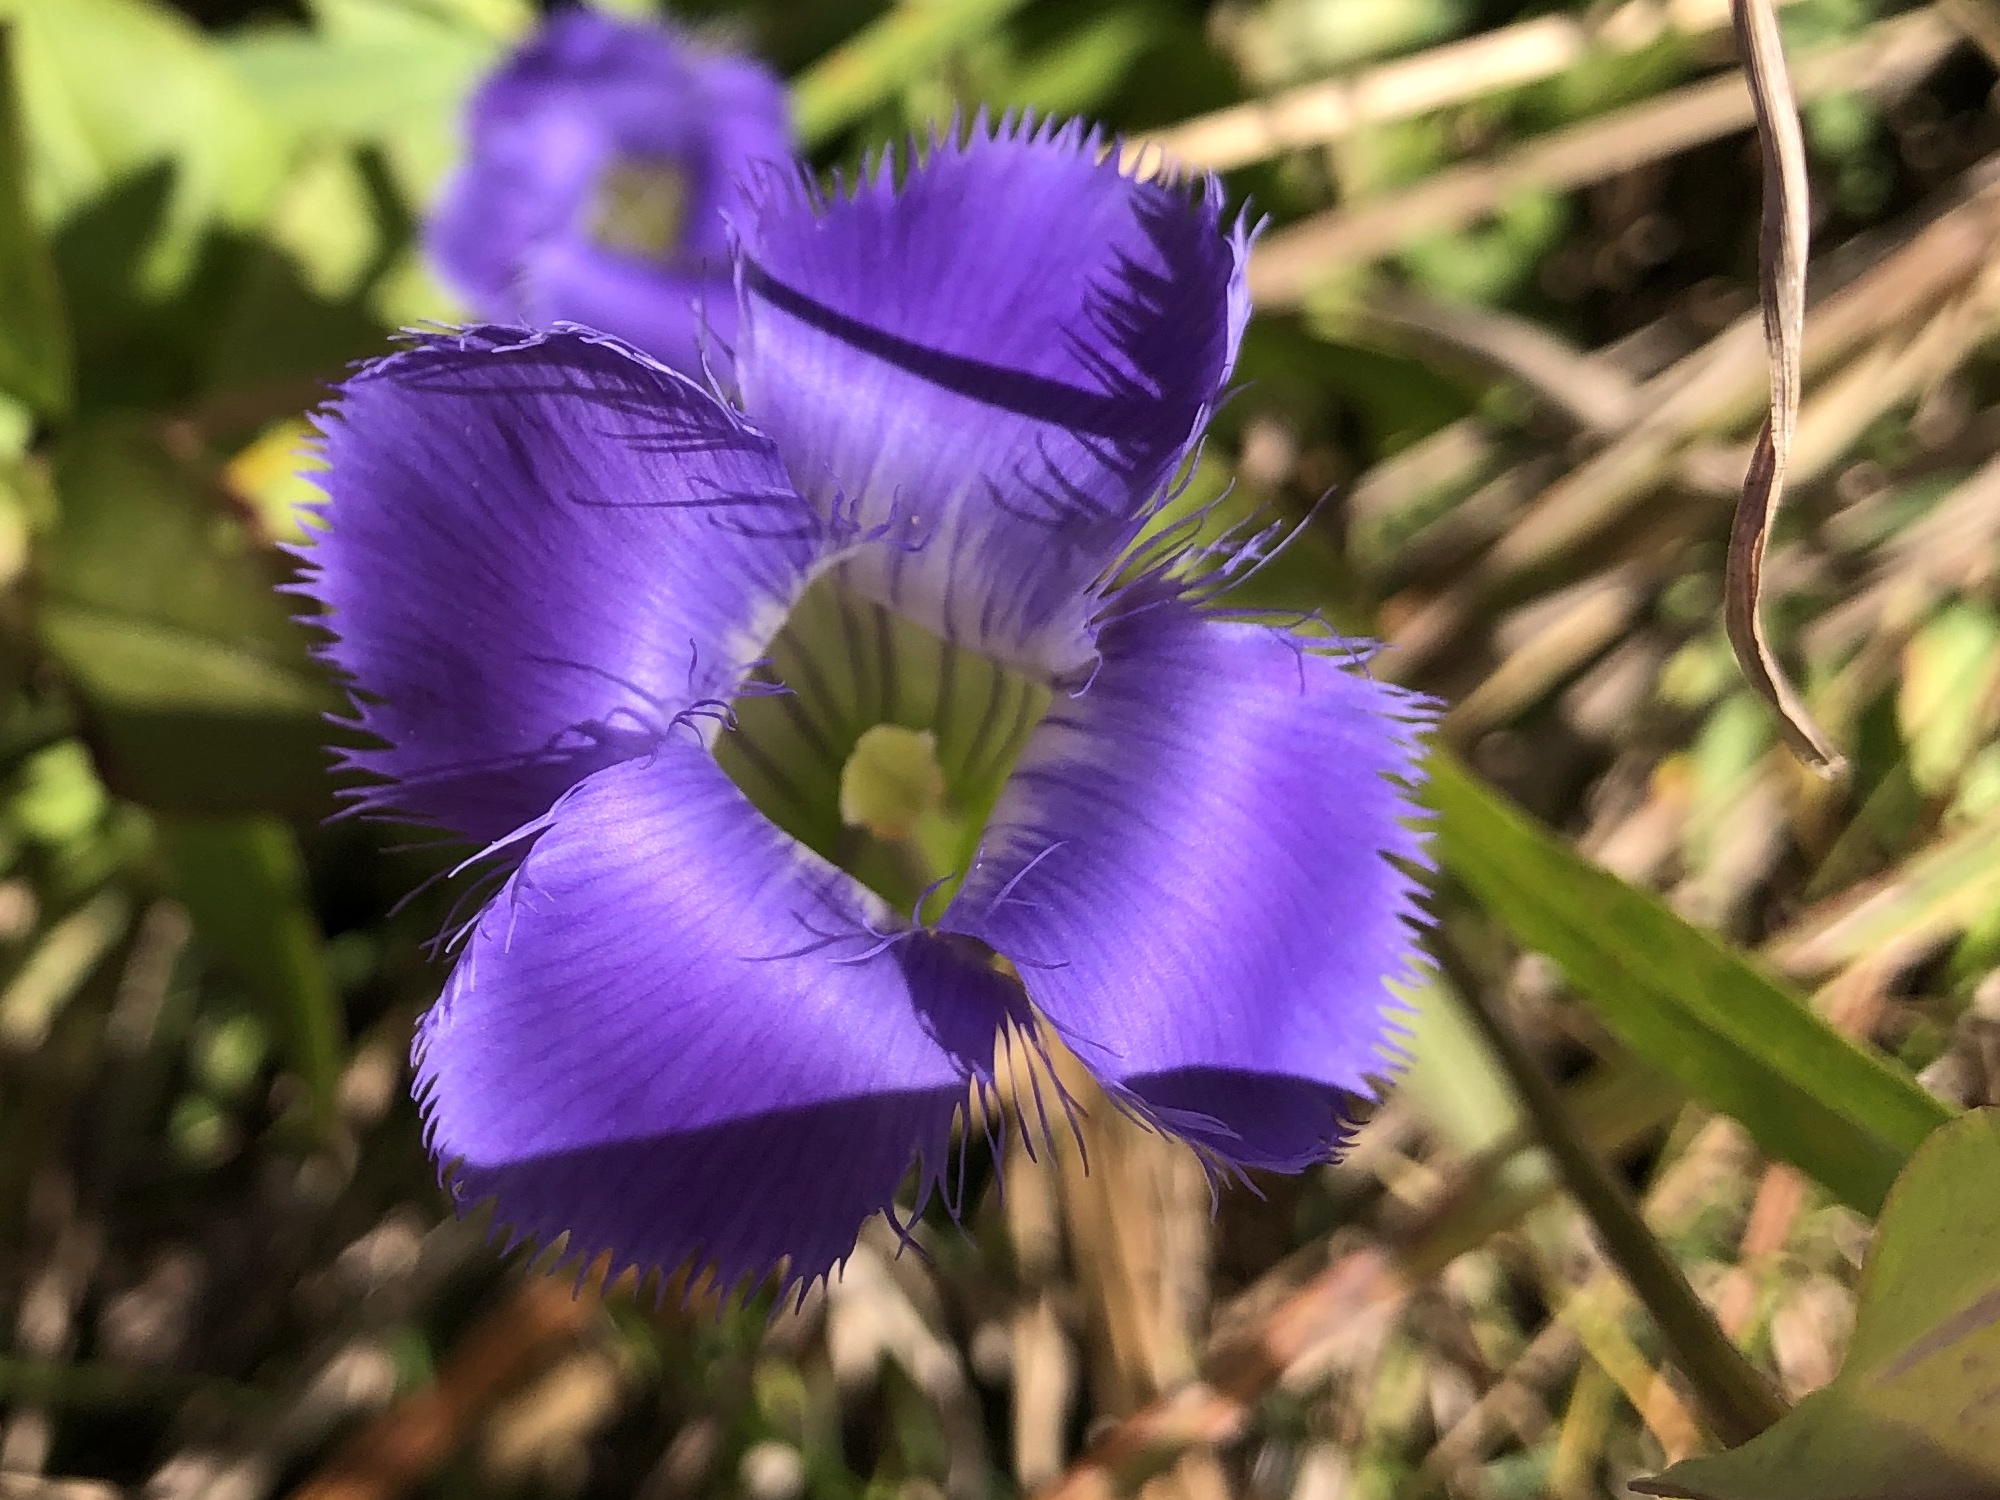 Fringed Gentian at the edge of the UW Arboretum's Curtis Prairie along a service road in Madison, Wisconsin on September 27, 2022.